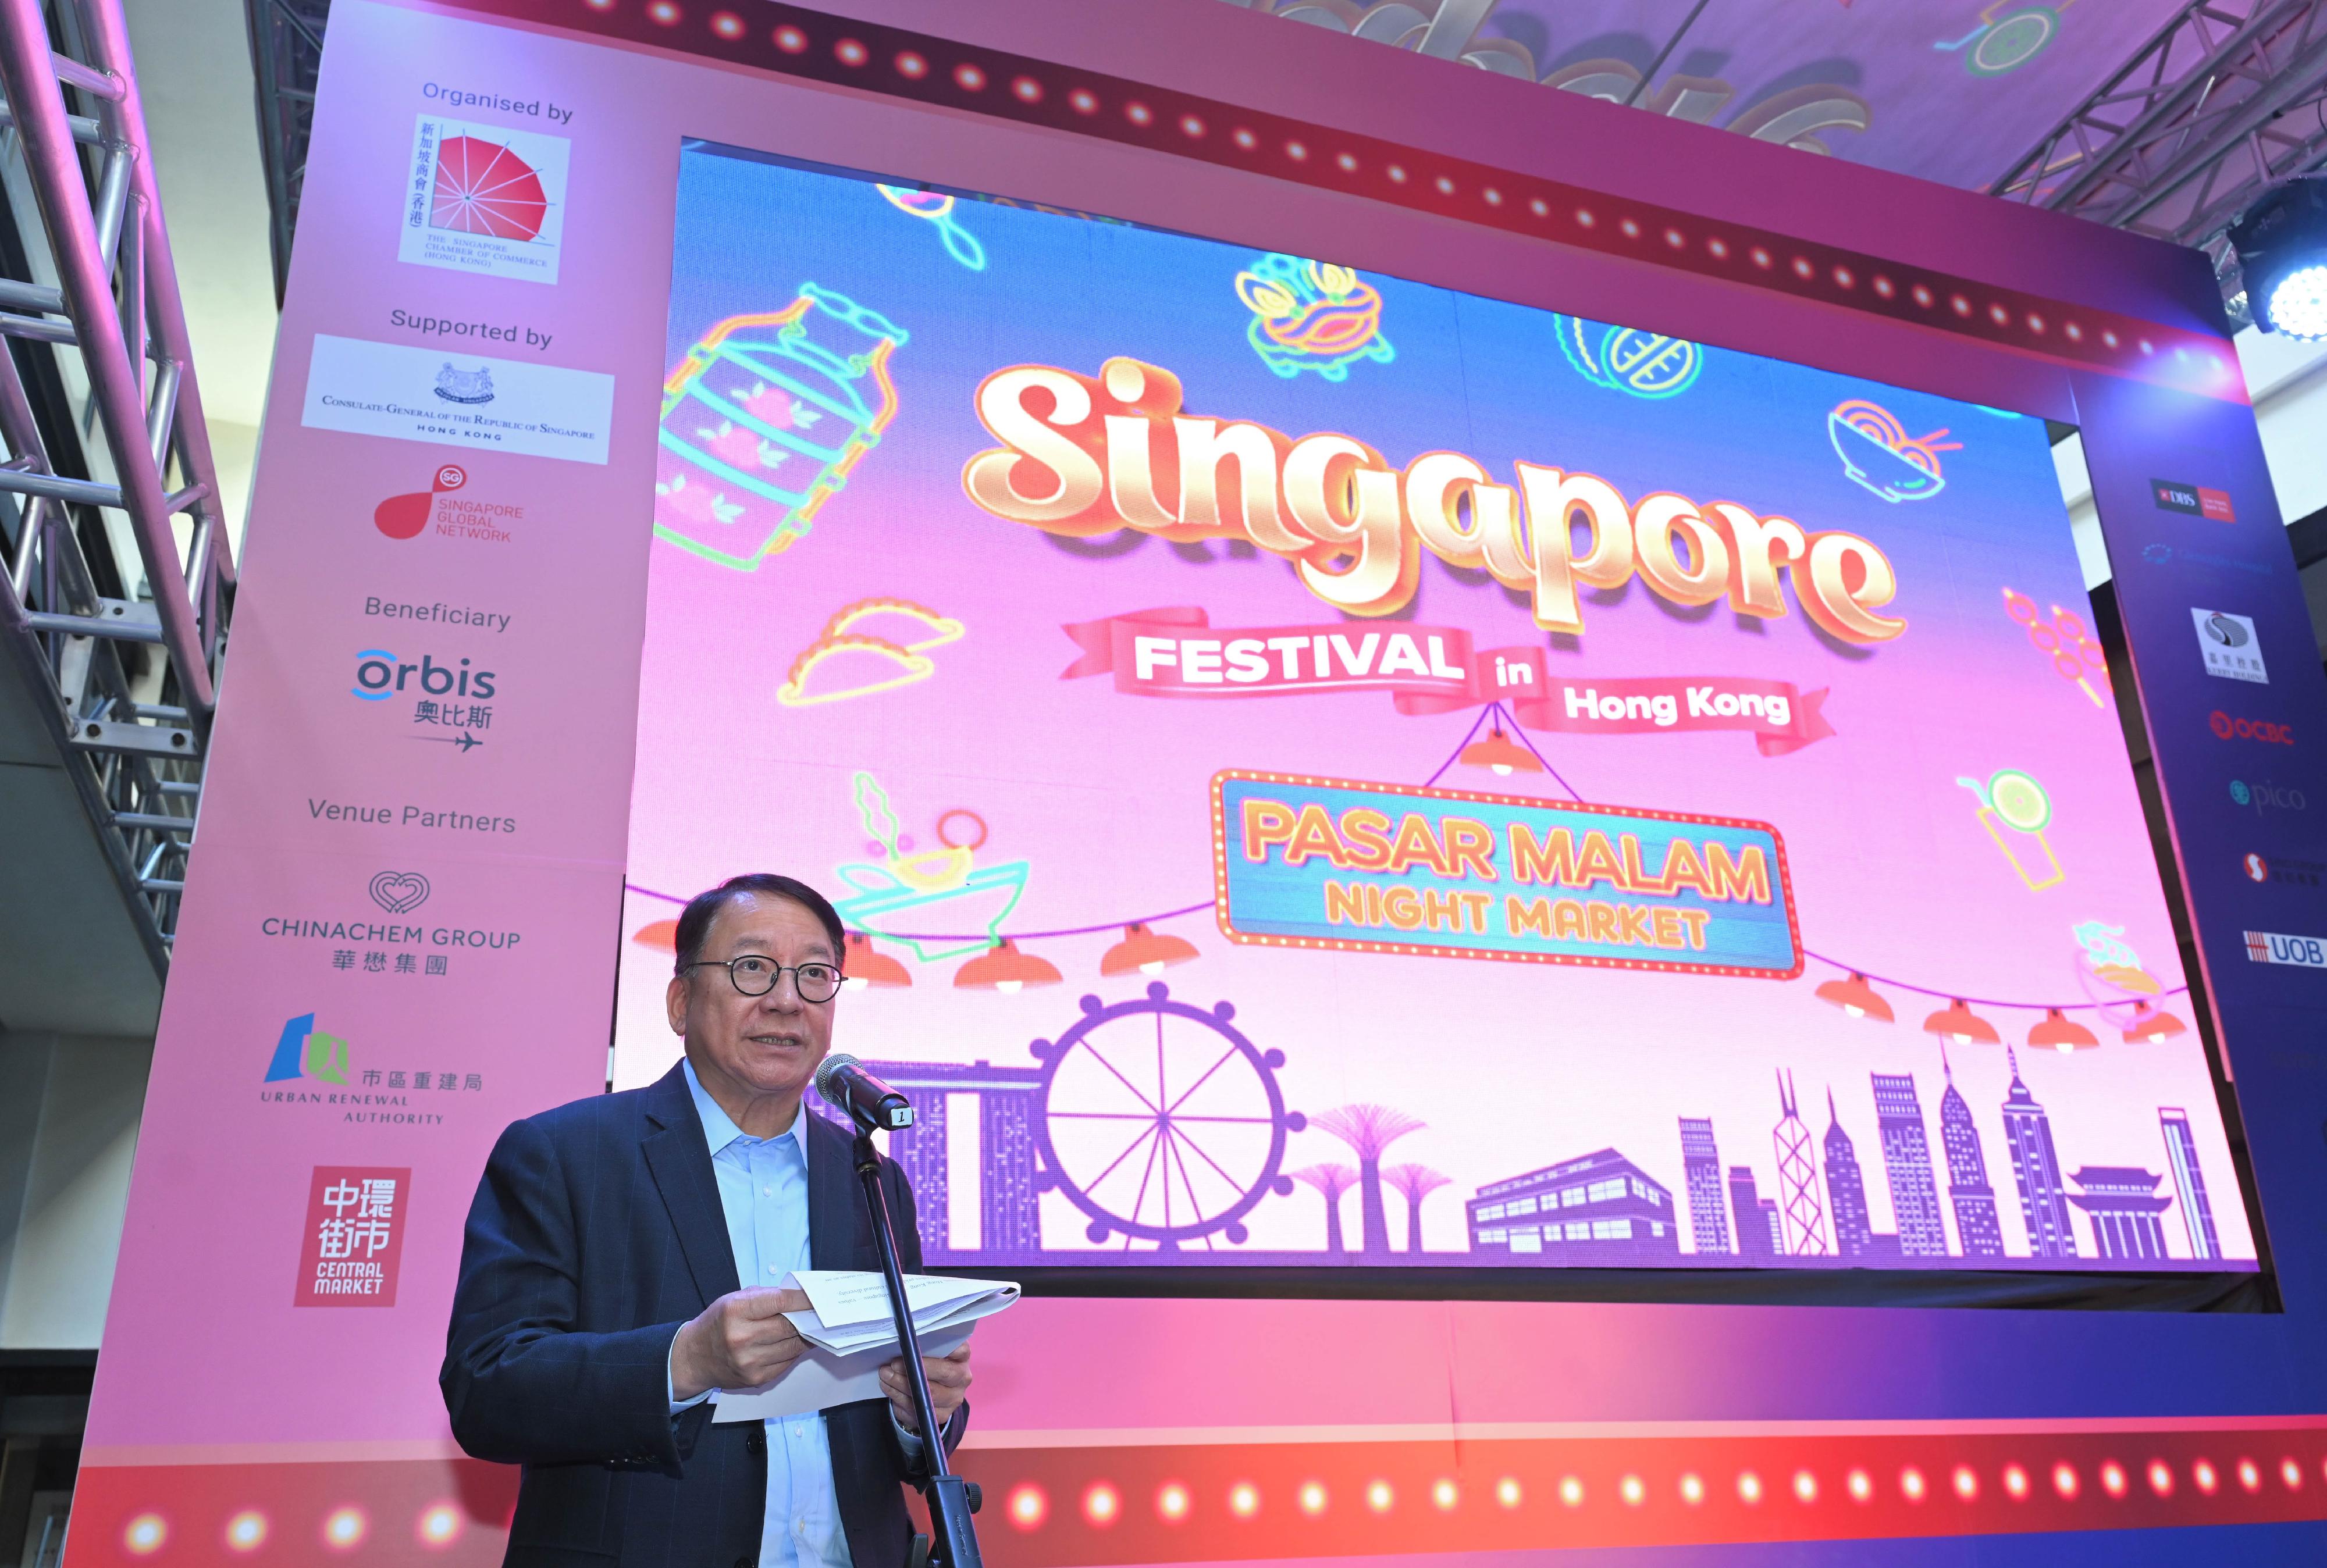 The Chief Secretary for Administration, Mr Chan Kwok-ki, speaks at the Grand Opening Ceremony of the Singapore Festival in Hong Kong today (November 18).